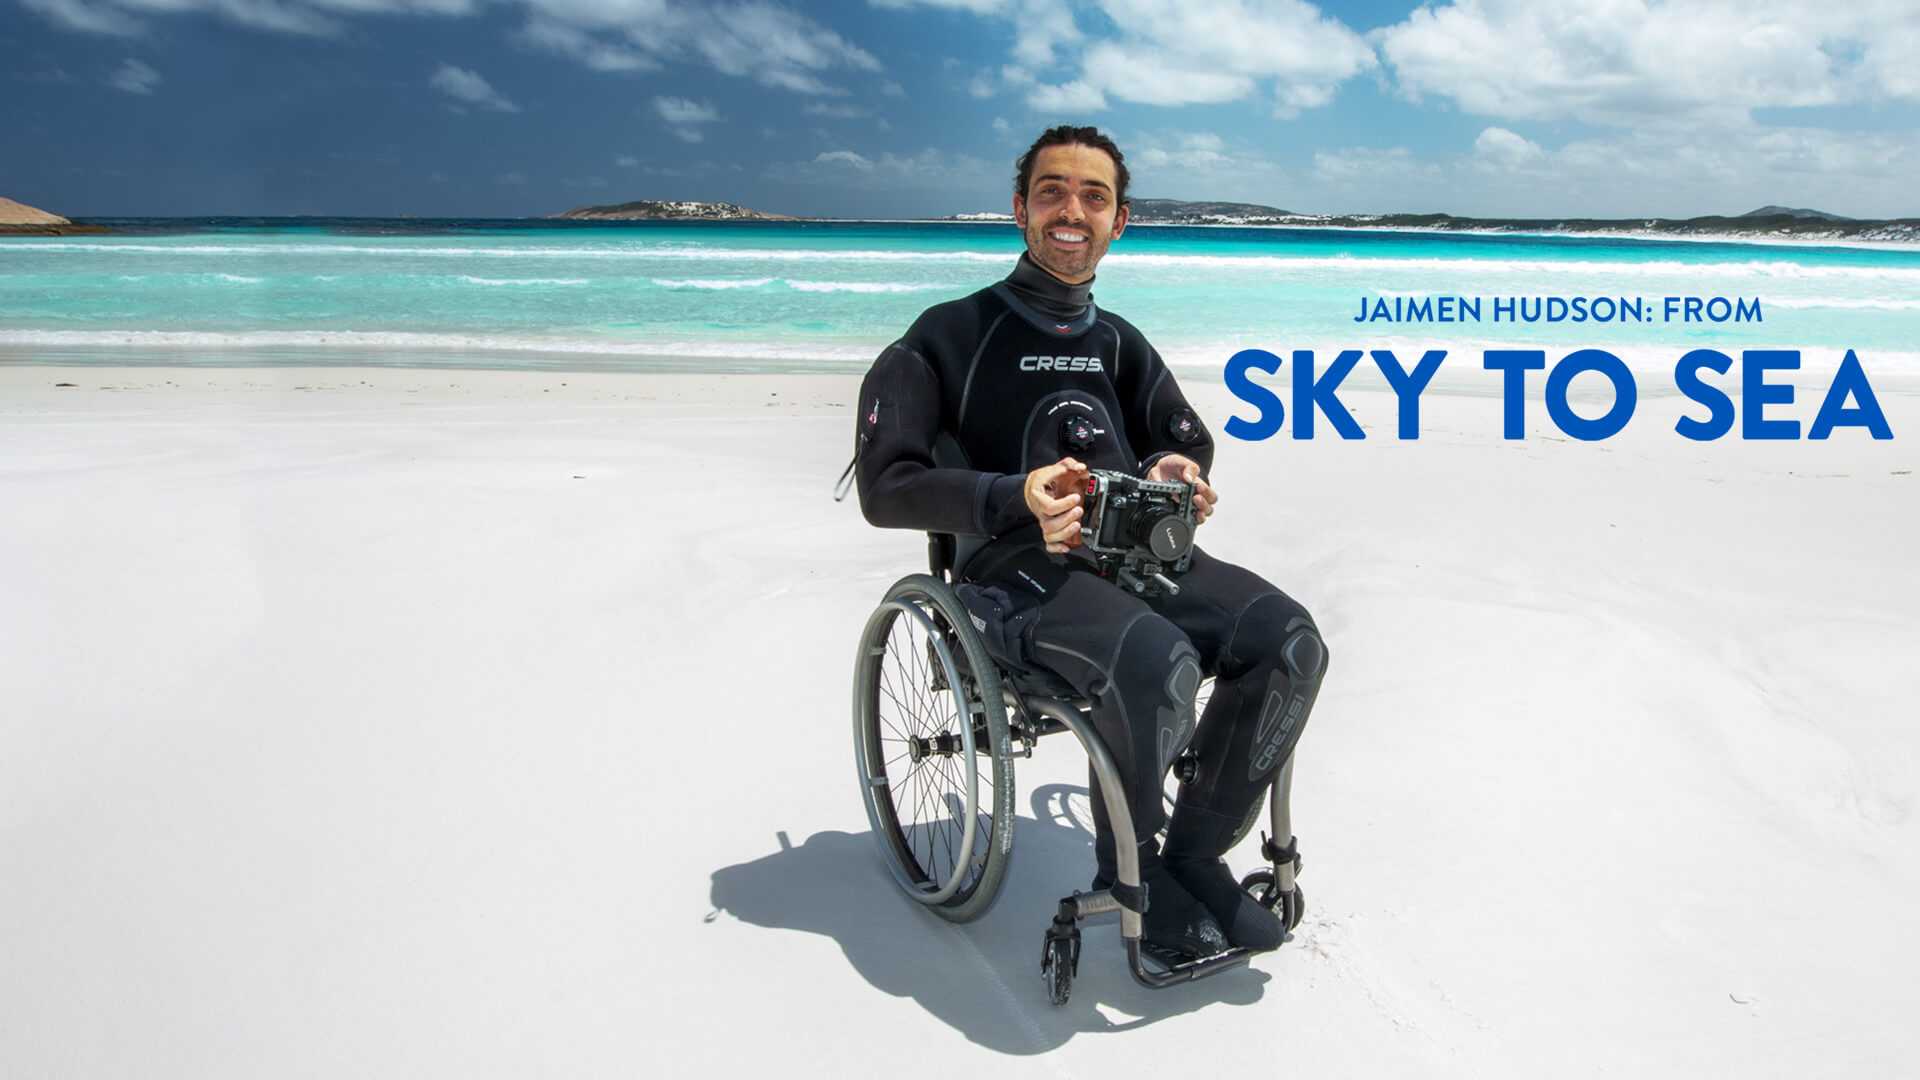 Jaimen Hudson poses on a white-sand beach in his wheelchair wearing a wetsuit. A turquoise sea glistens in the background.